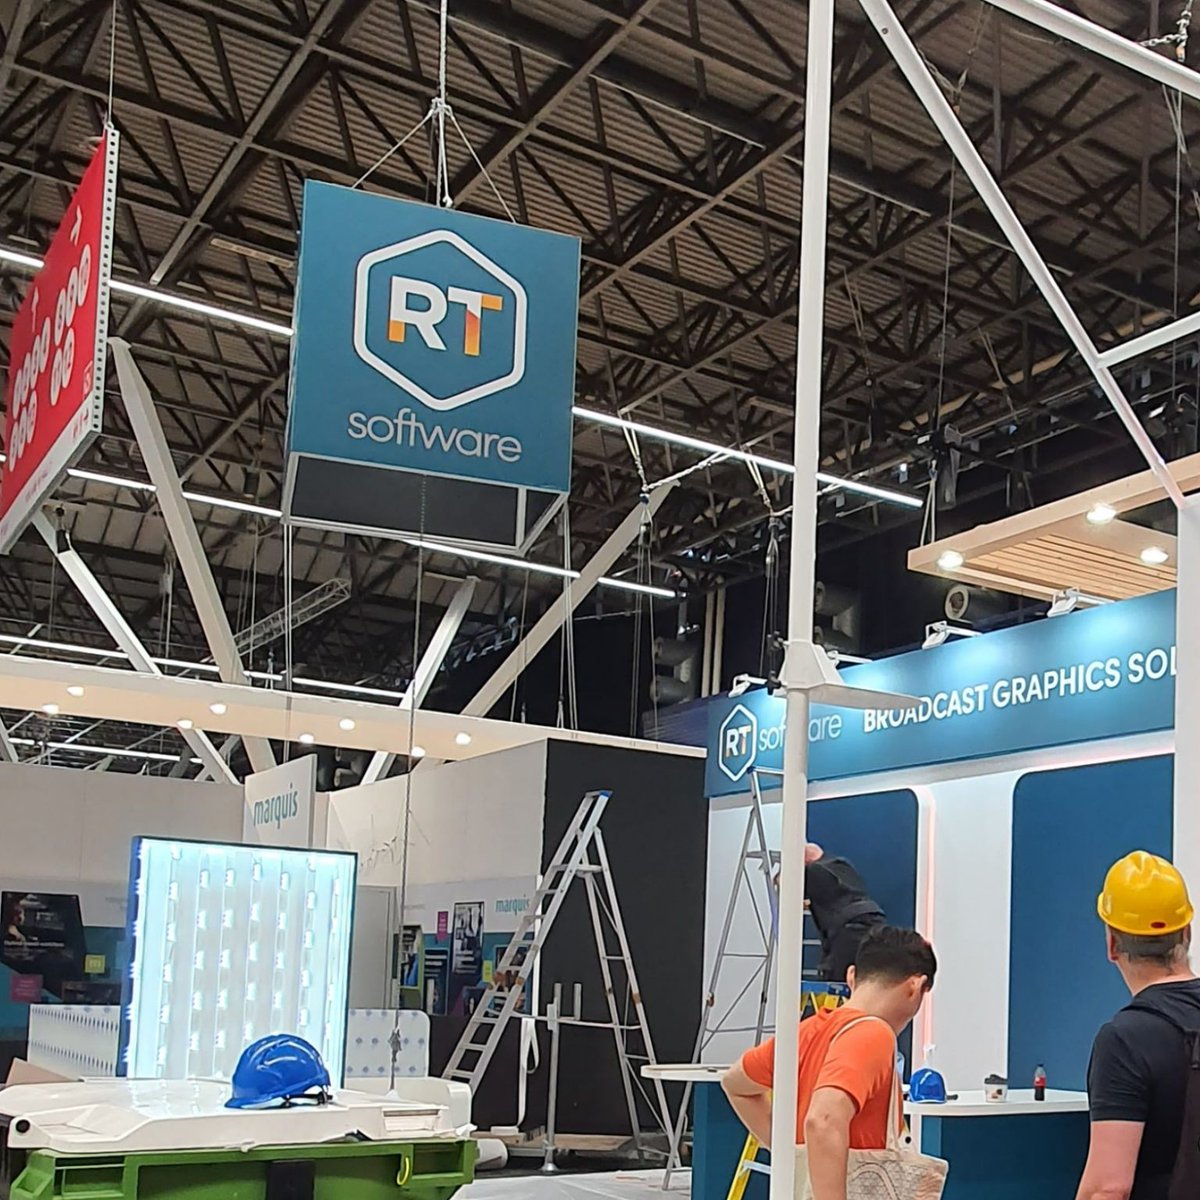 Coming to IBC for Broadcast Graphics? We'll be ready! See you in Hall 7 - Stand 7.B19. #ibc2023 #broadcastgraphics #tactic #swift #sports #newsroom #channelbranding